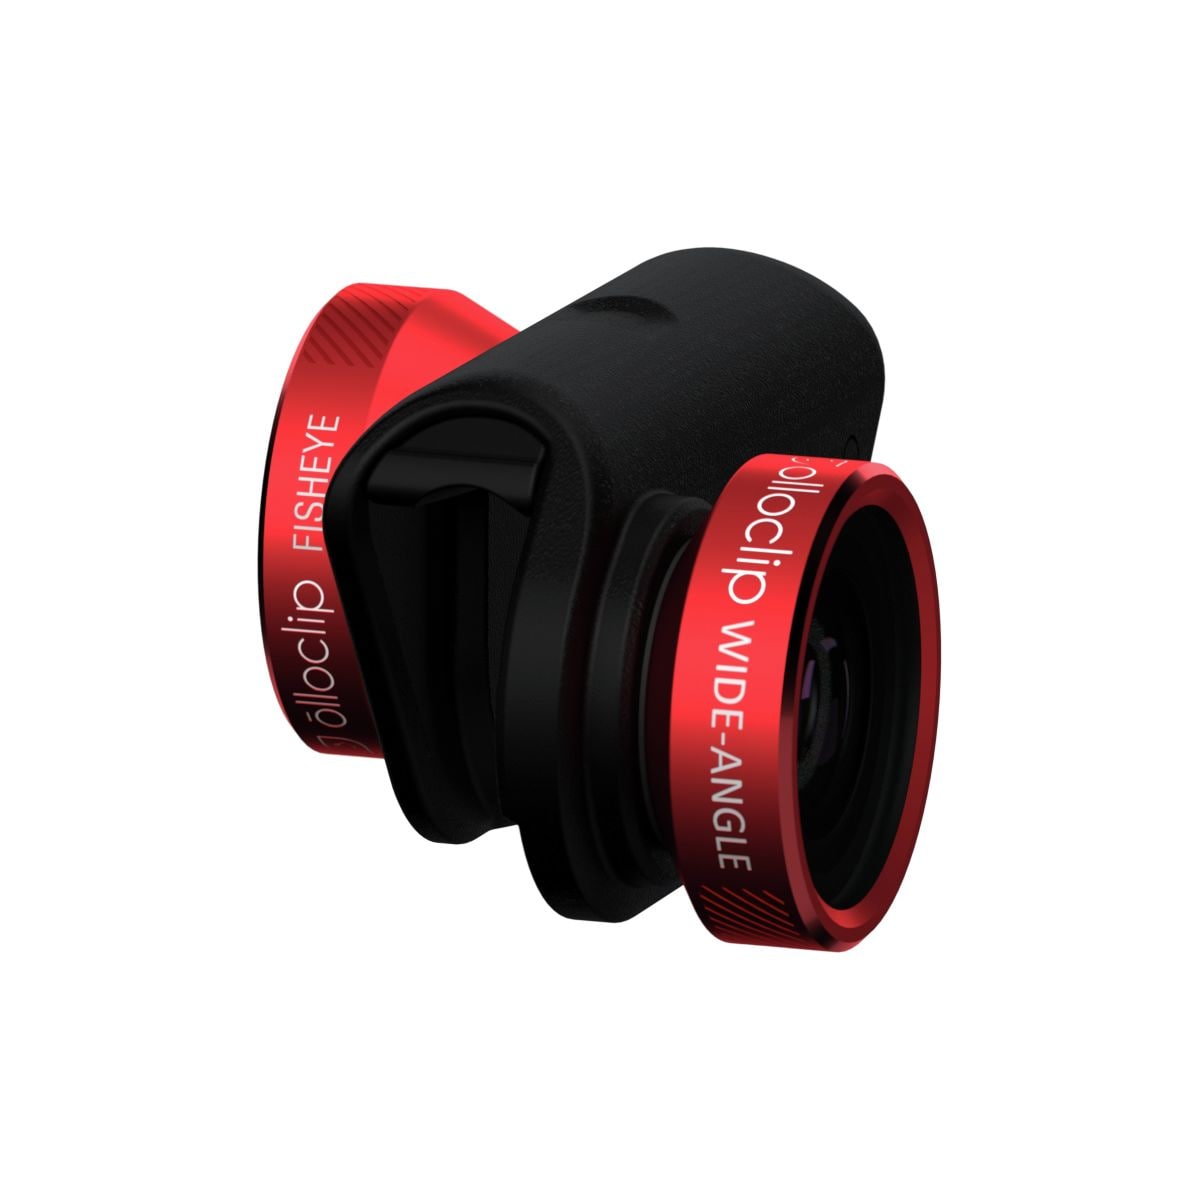 olloclip 4-in-1 Lens System - iPhone 6\/6 Plus Red Lens, One Size